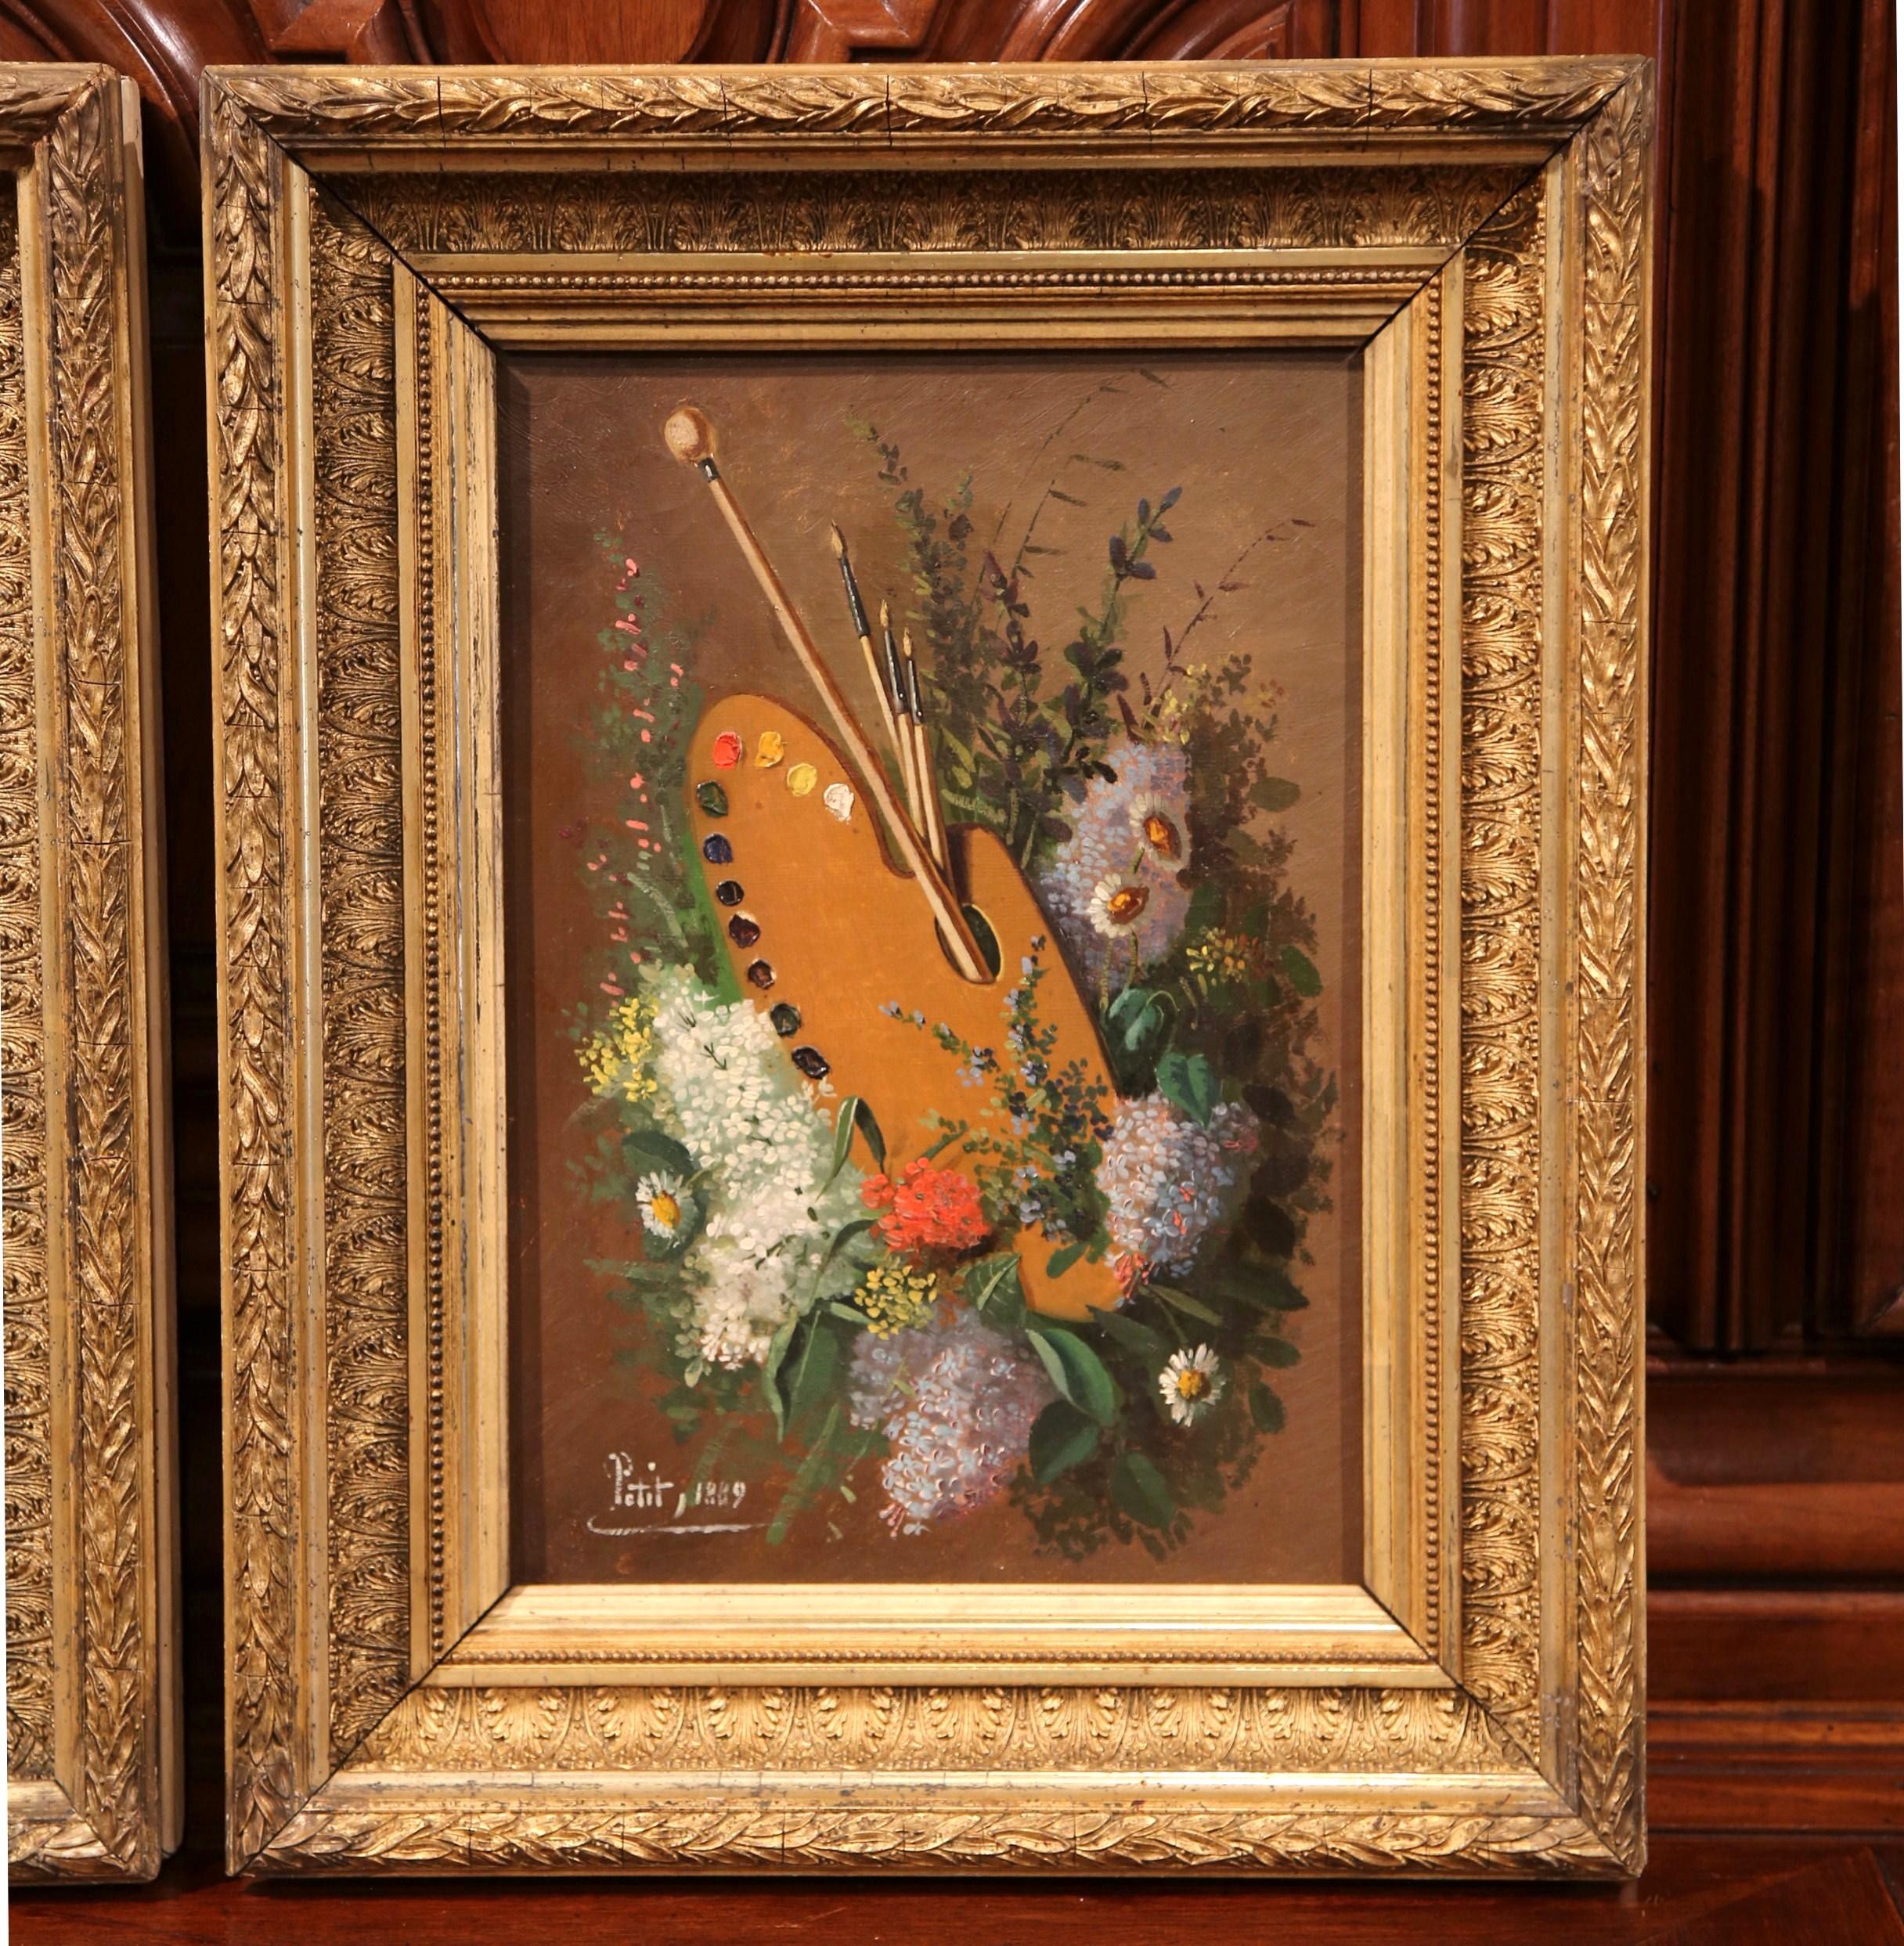 French Pair of 19th Century Still Life Paintings in Gilt Frames Signed Petit, 1889